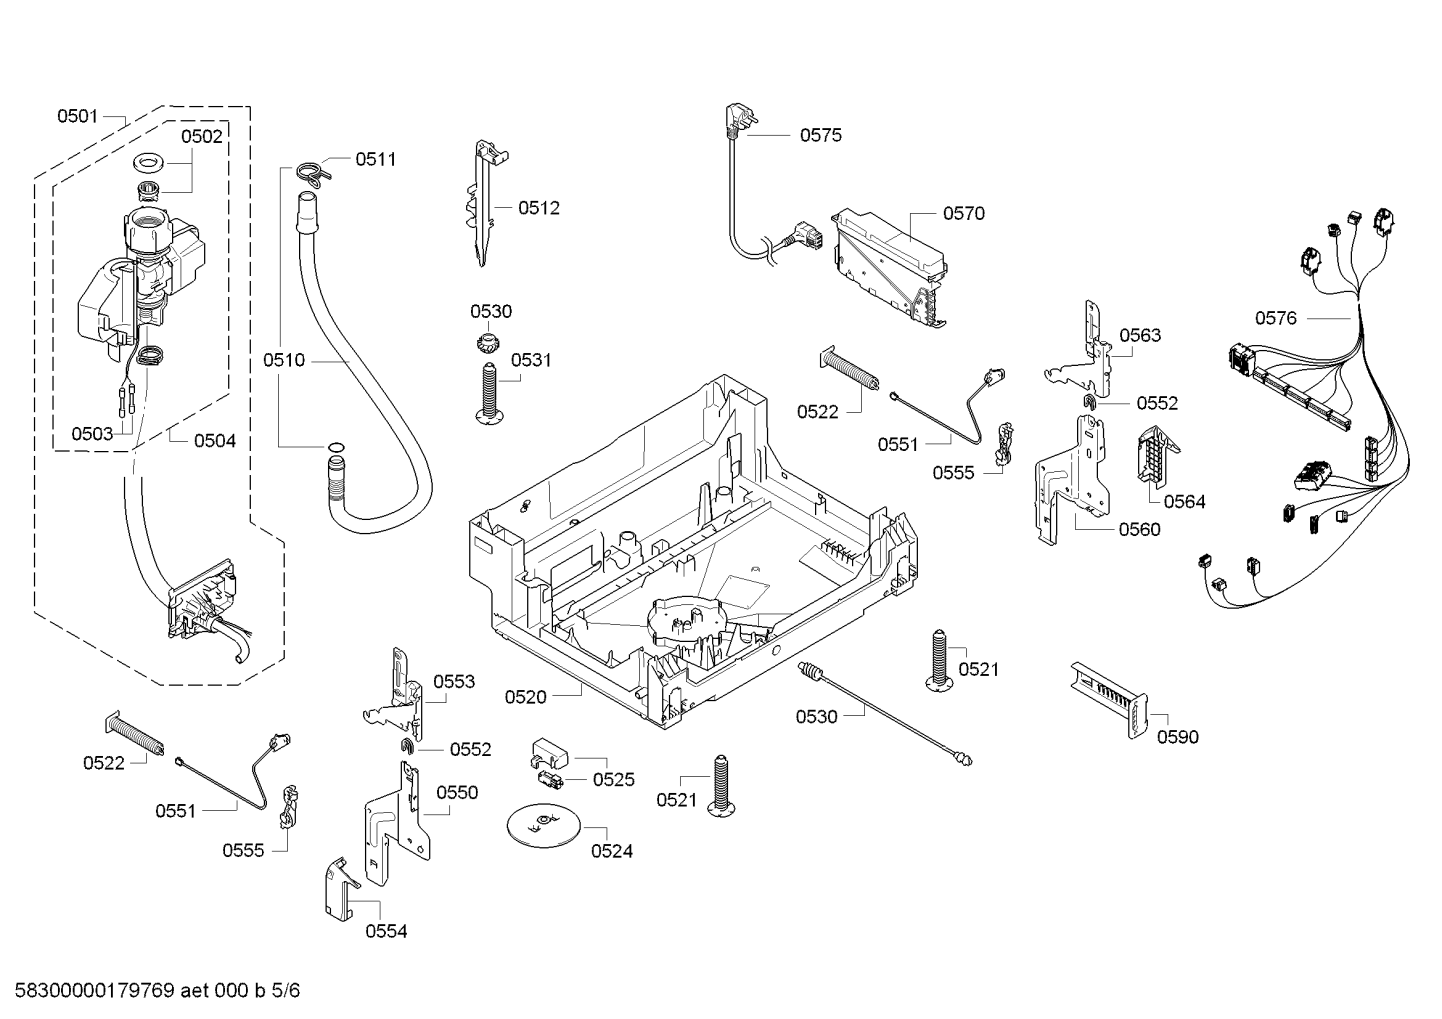 drawing_link_5_device_1745308